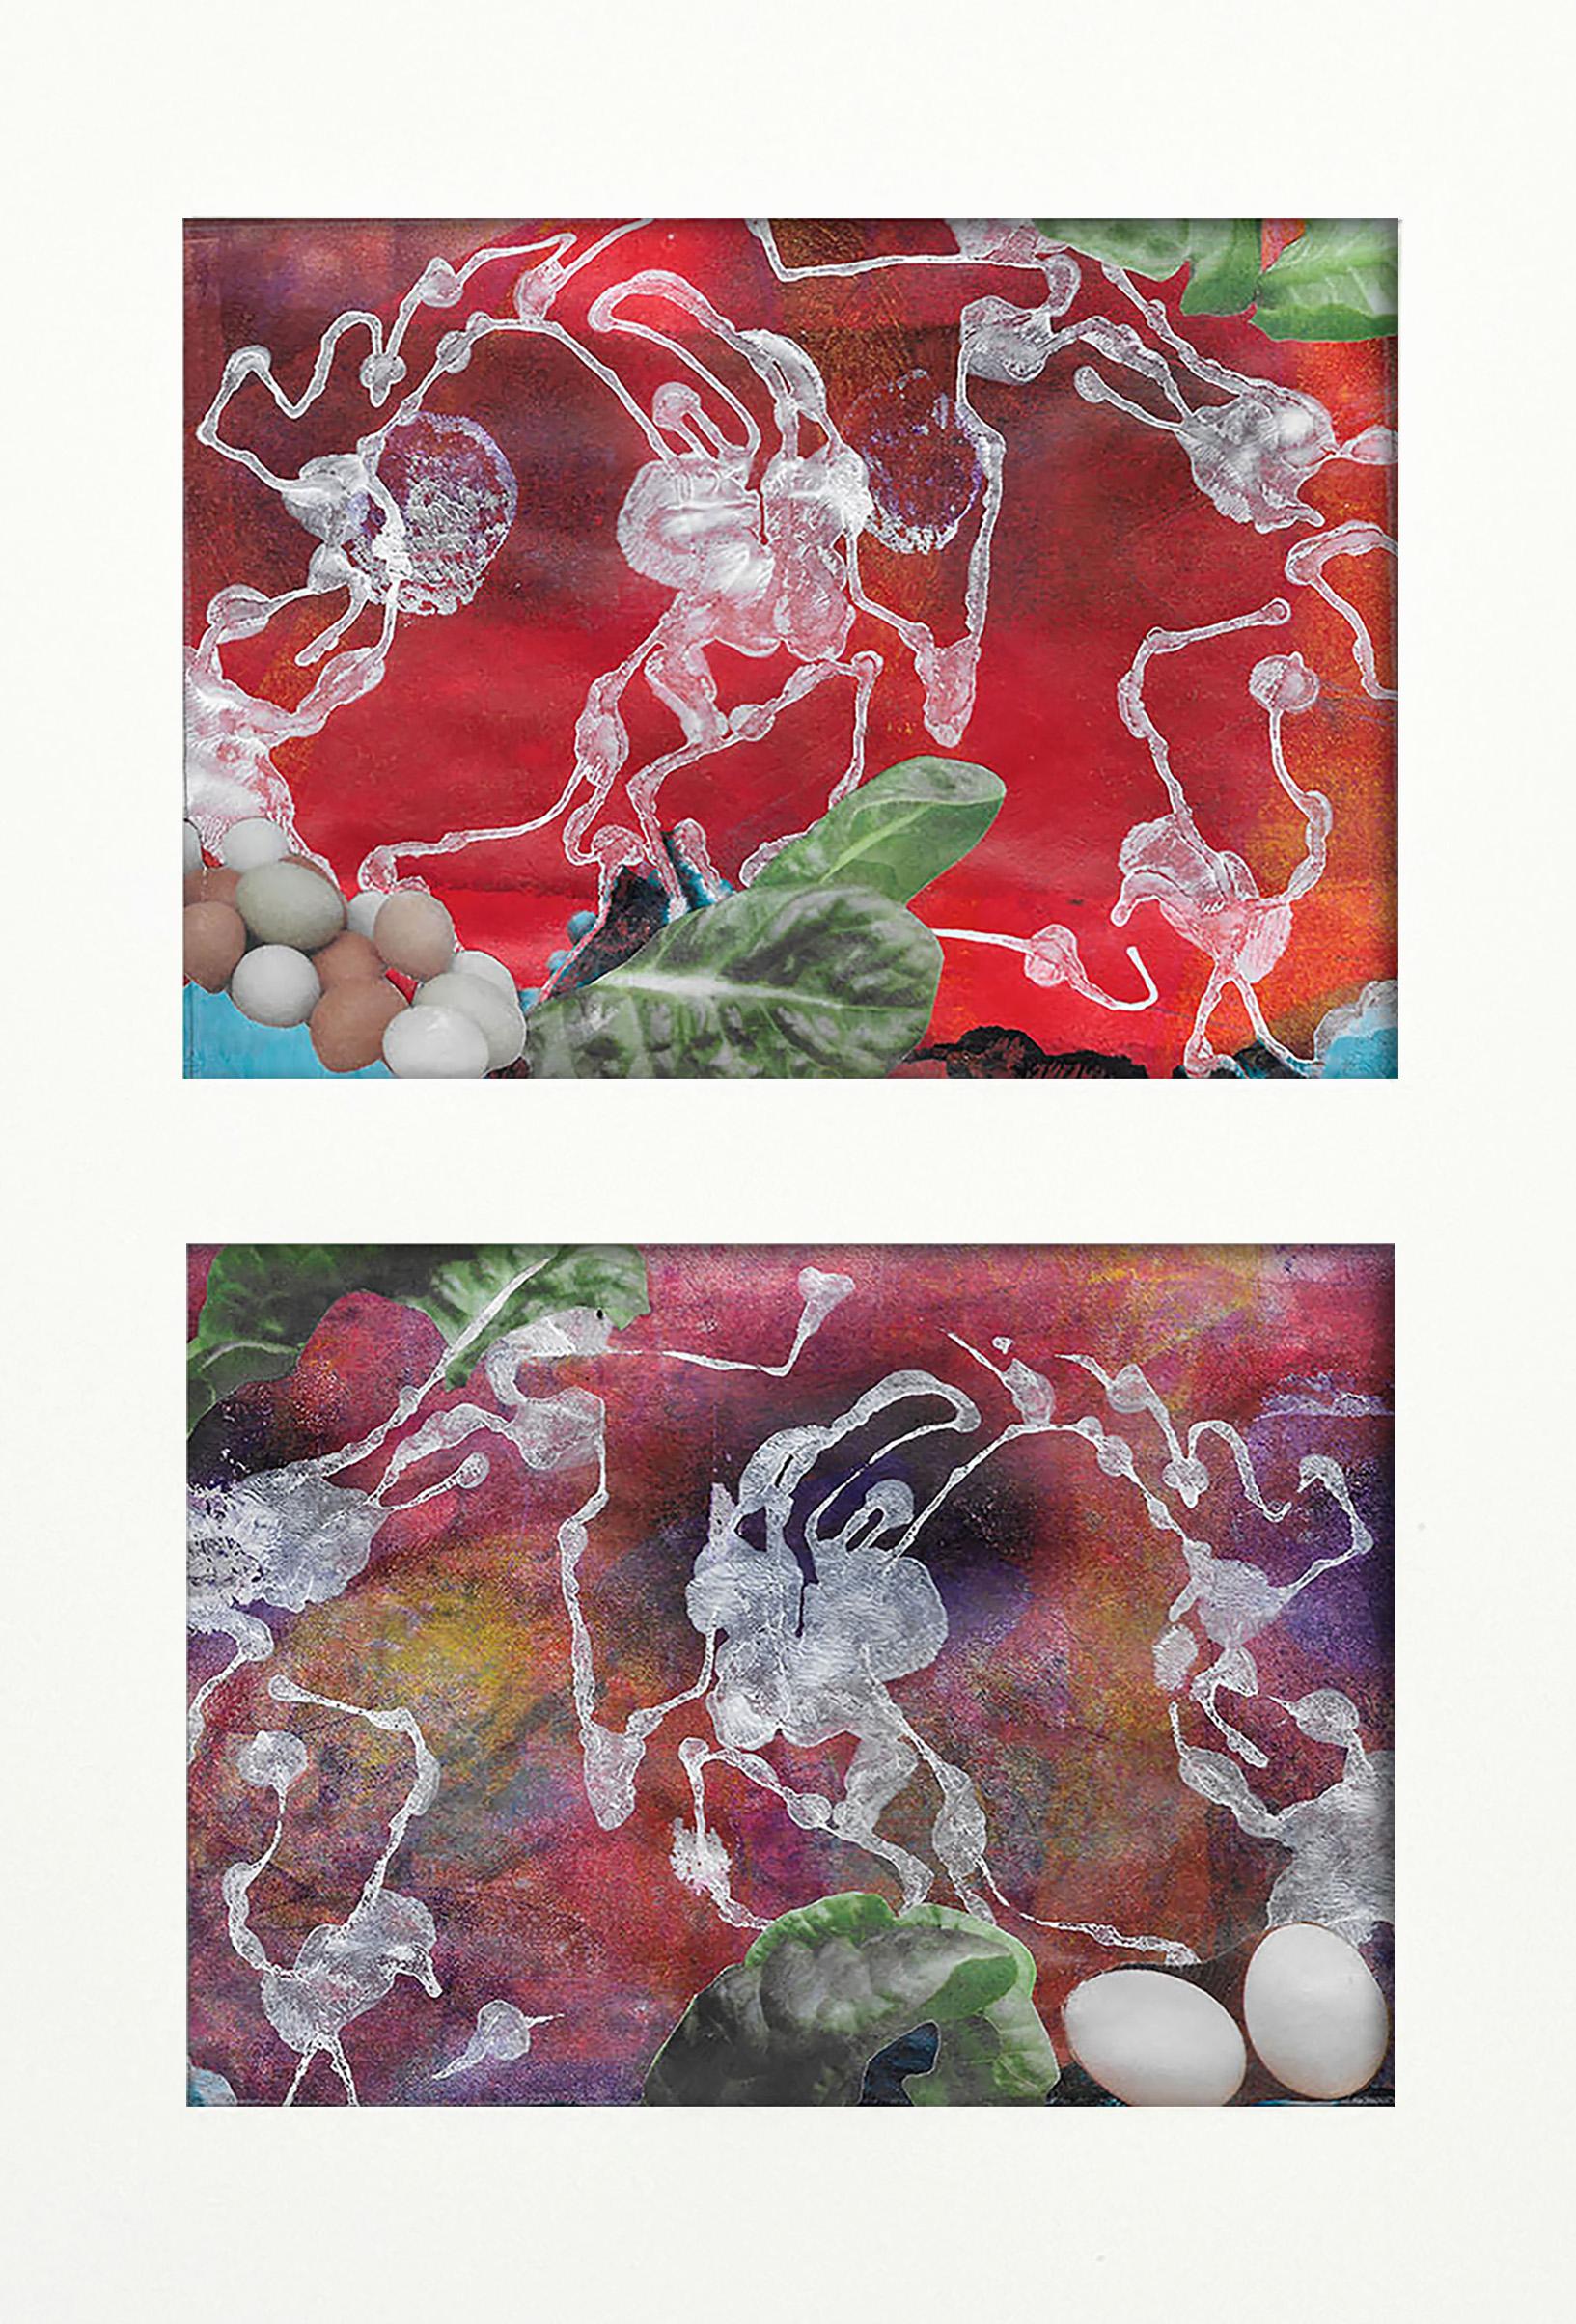 "Zigzag", abstract, diptych, whimsical, eggs, green, red, ivory, white, collage - Mixed Media Art by Monica DeSalvo